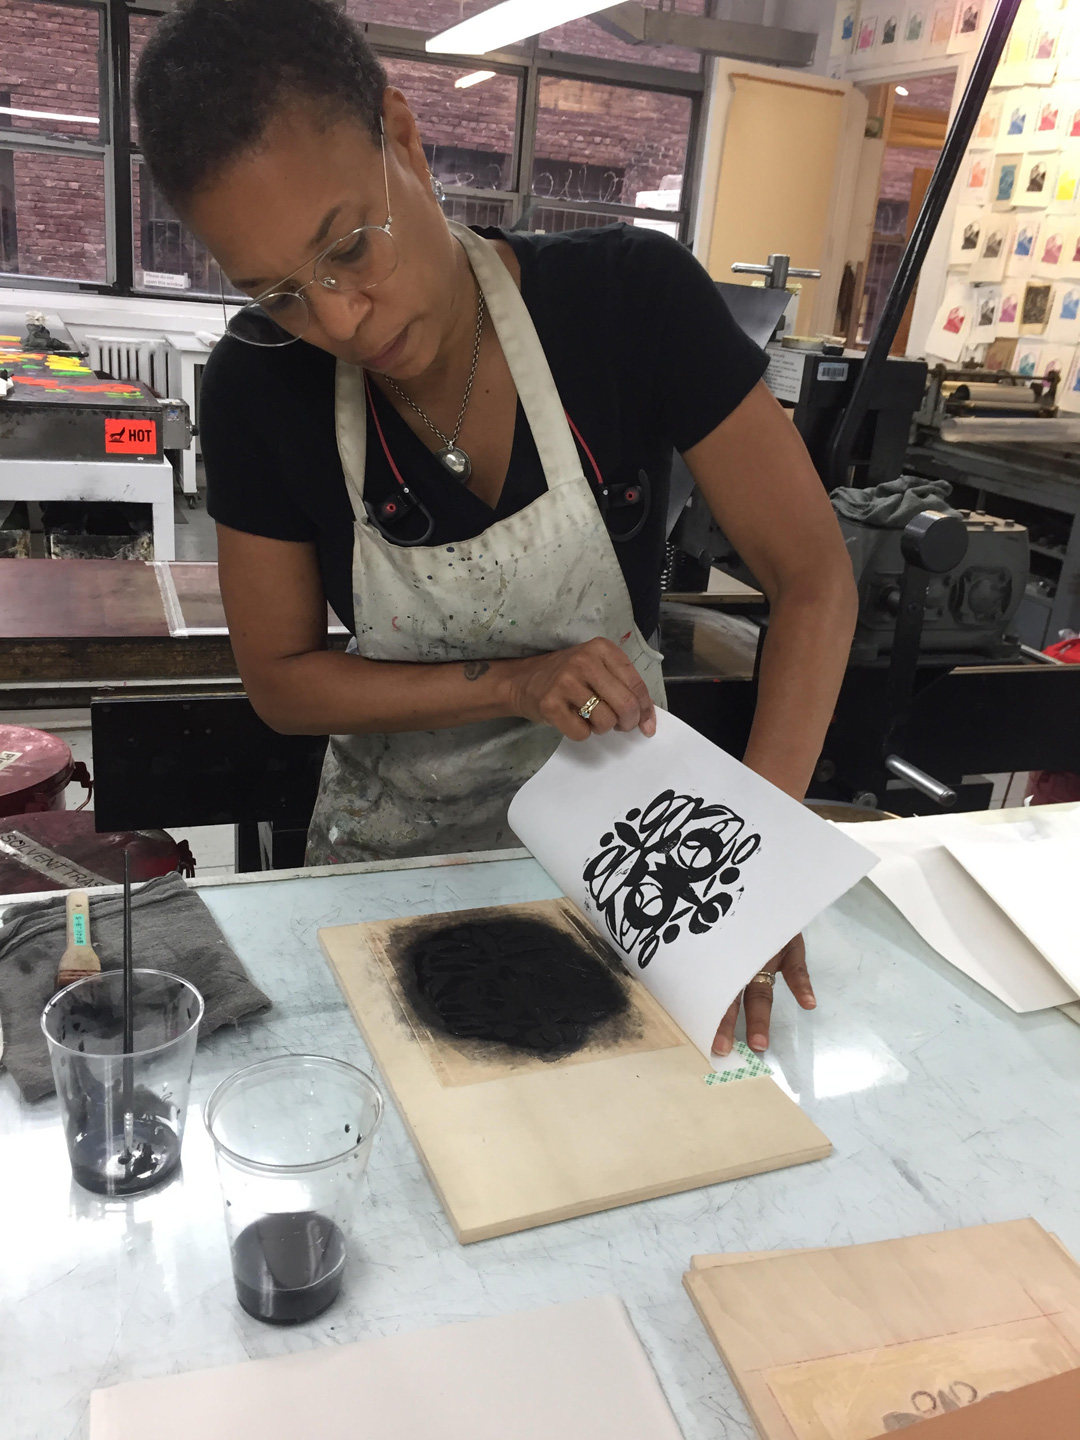 A photo of artist Karen J. Revis lifting a print to inspect it. She is a young Black woman with short hair, wearing wire-rimmed glasses, a black T-shirt, and a work apron. She is working in a room at the EFA Robert Blackburn Workshop that is full of different printing machines.